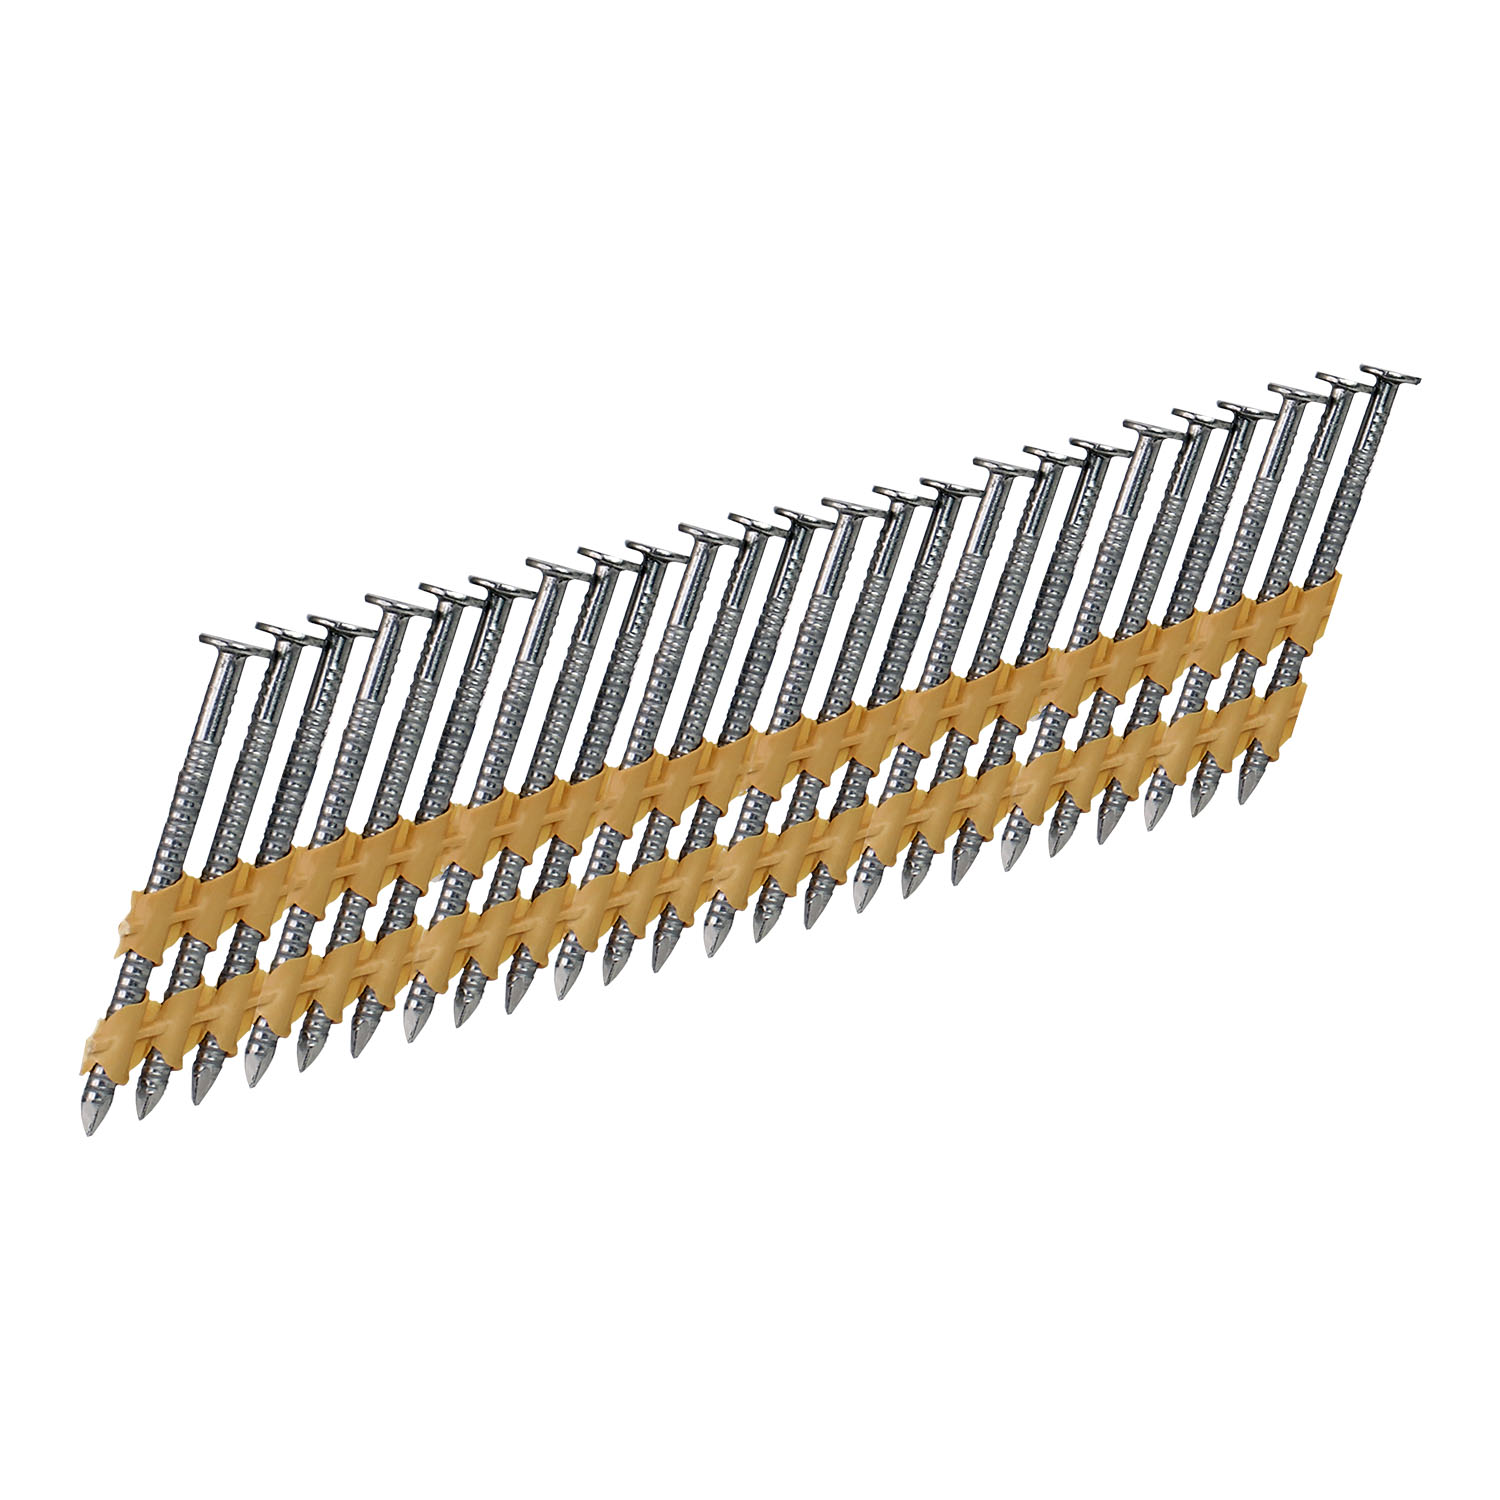 Freeman FR.120-3GRS 3-Inch by .120-Inch Plastic Collated Galvanized Ring Shank Framing Nails Renewed 2000 Per Box 